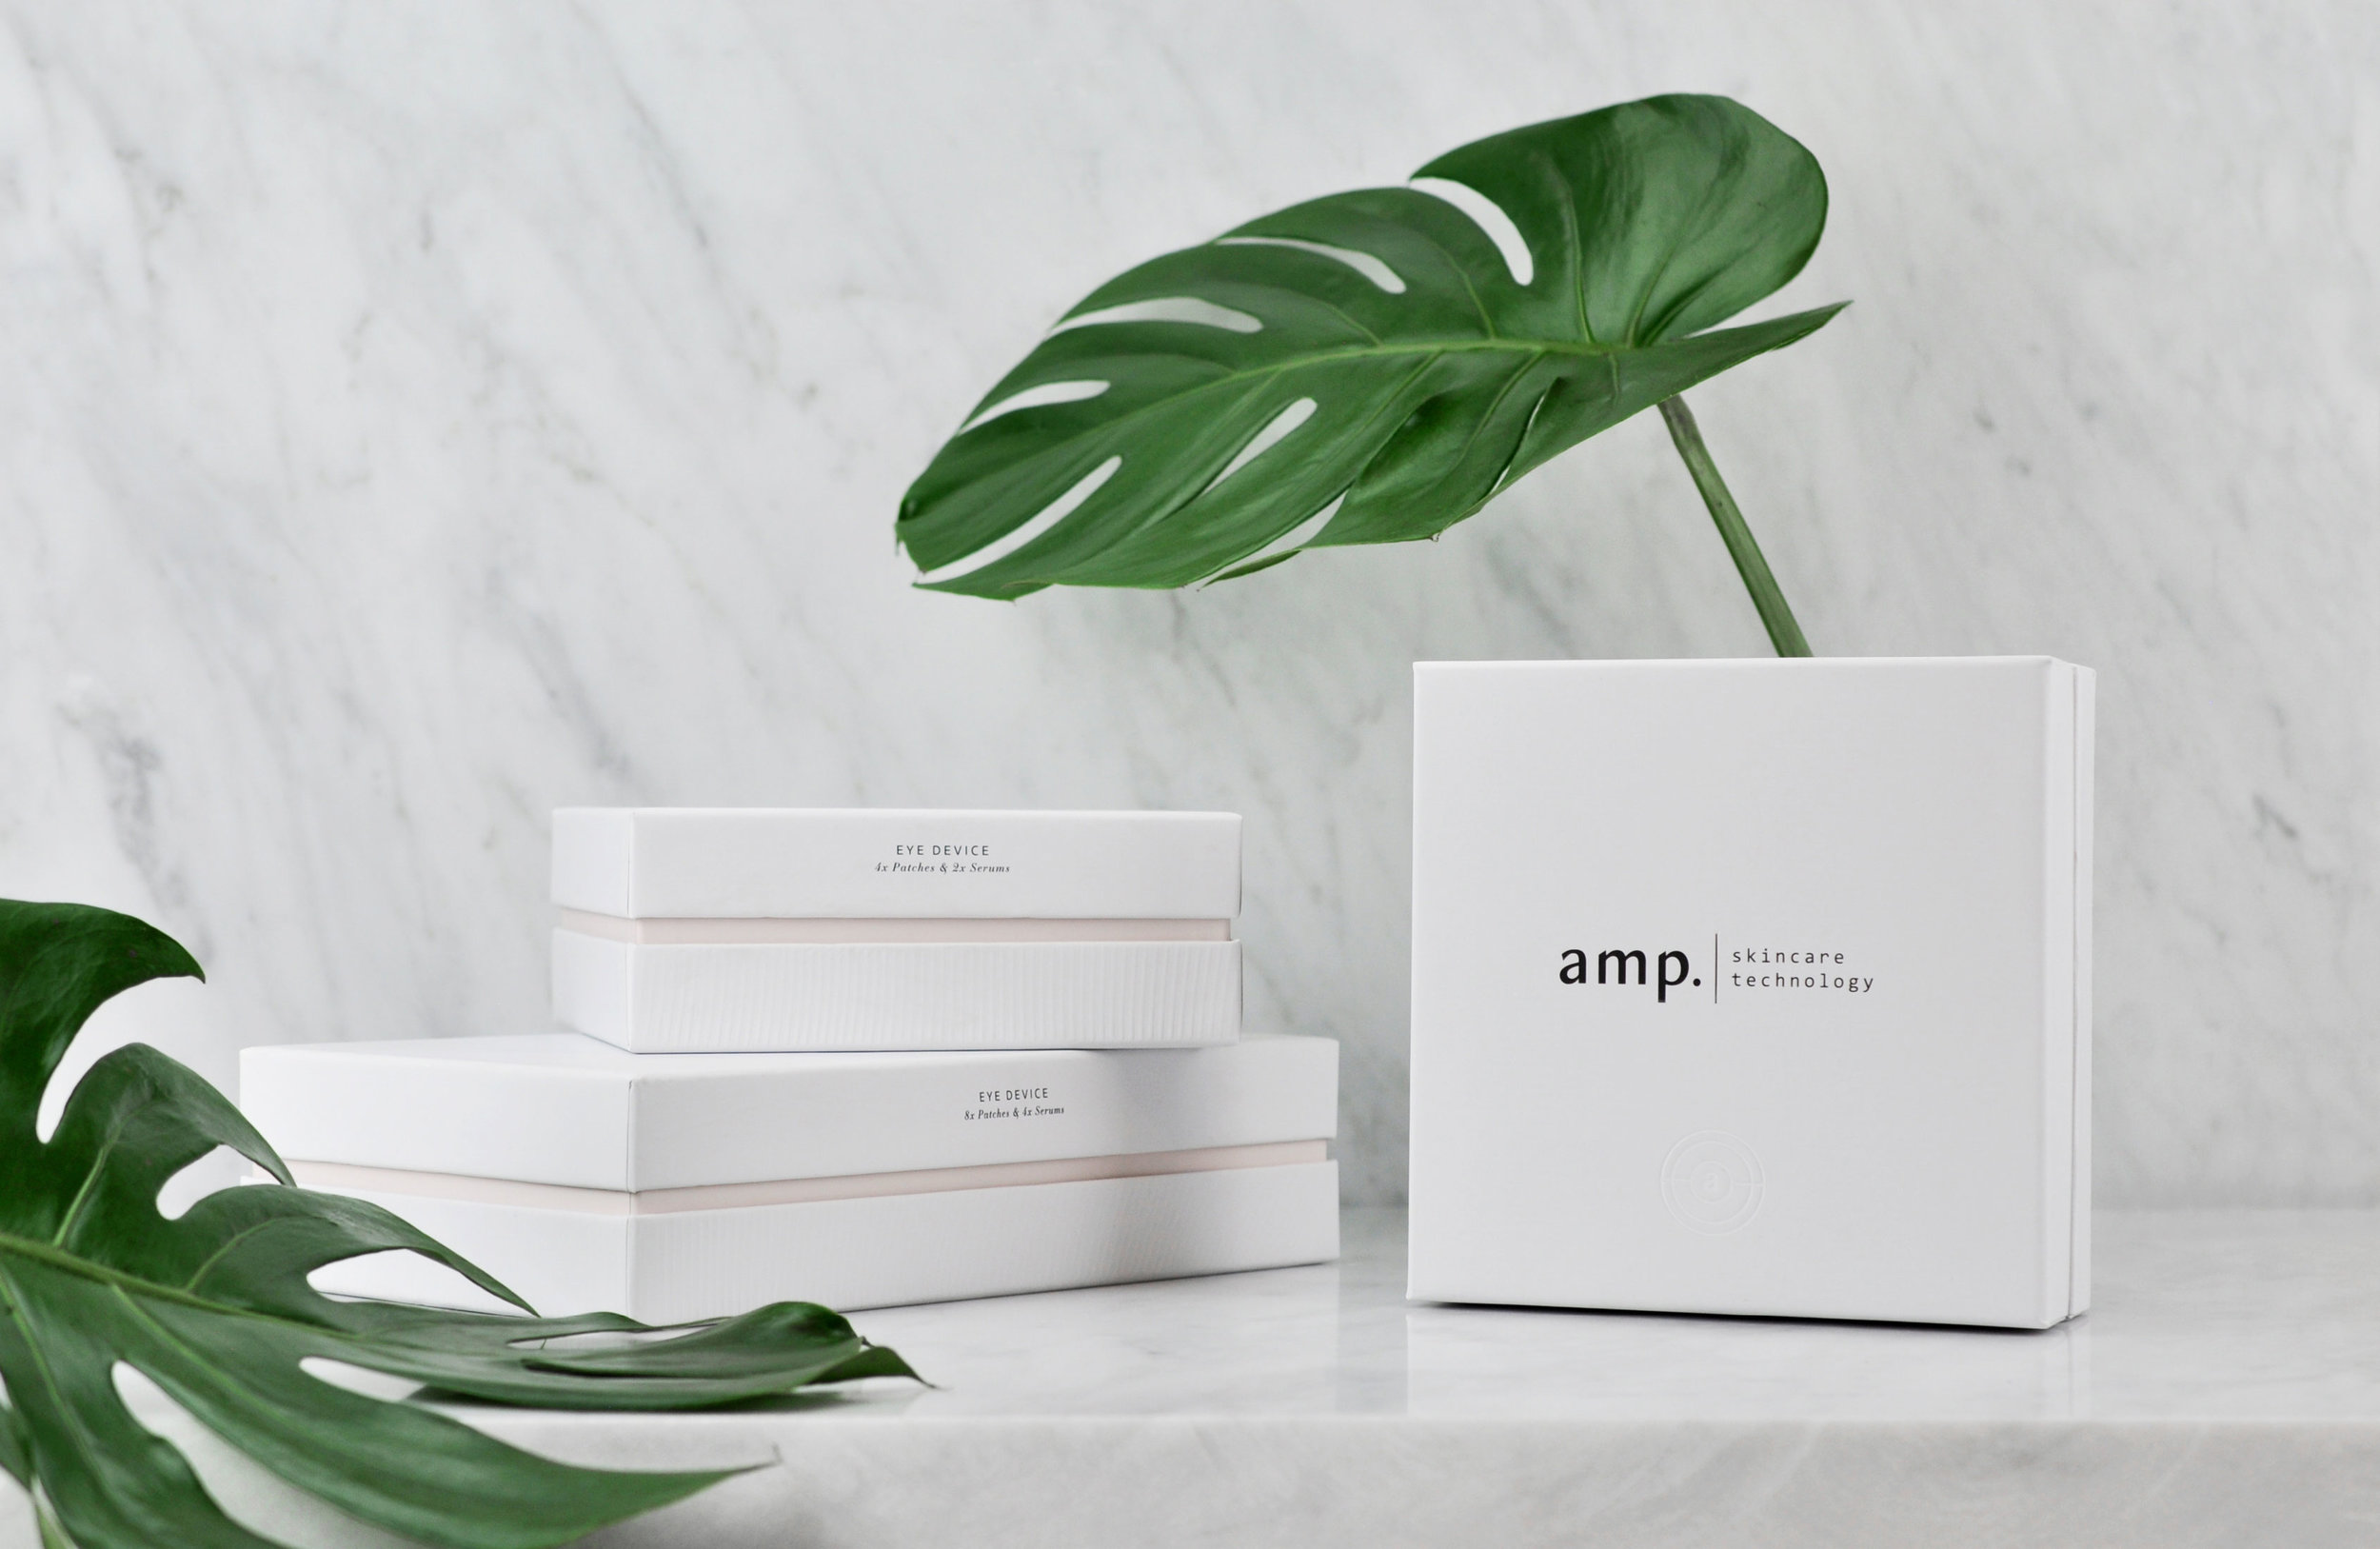 Brand Creation and Packaging for a Leader in Skincare Technology